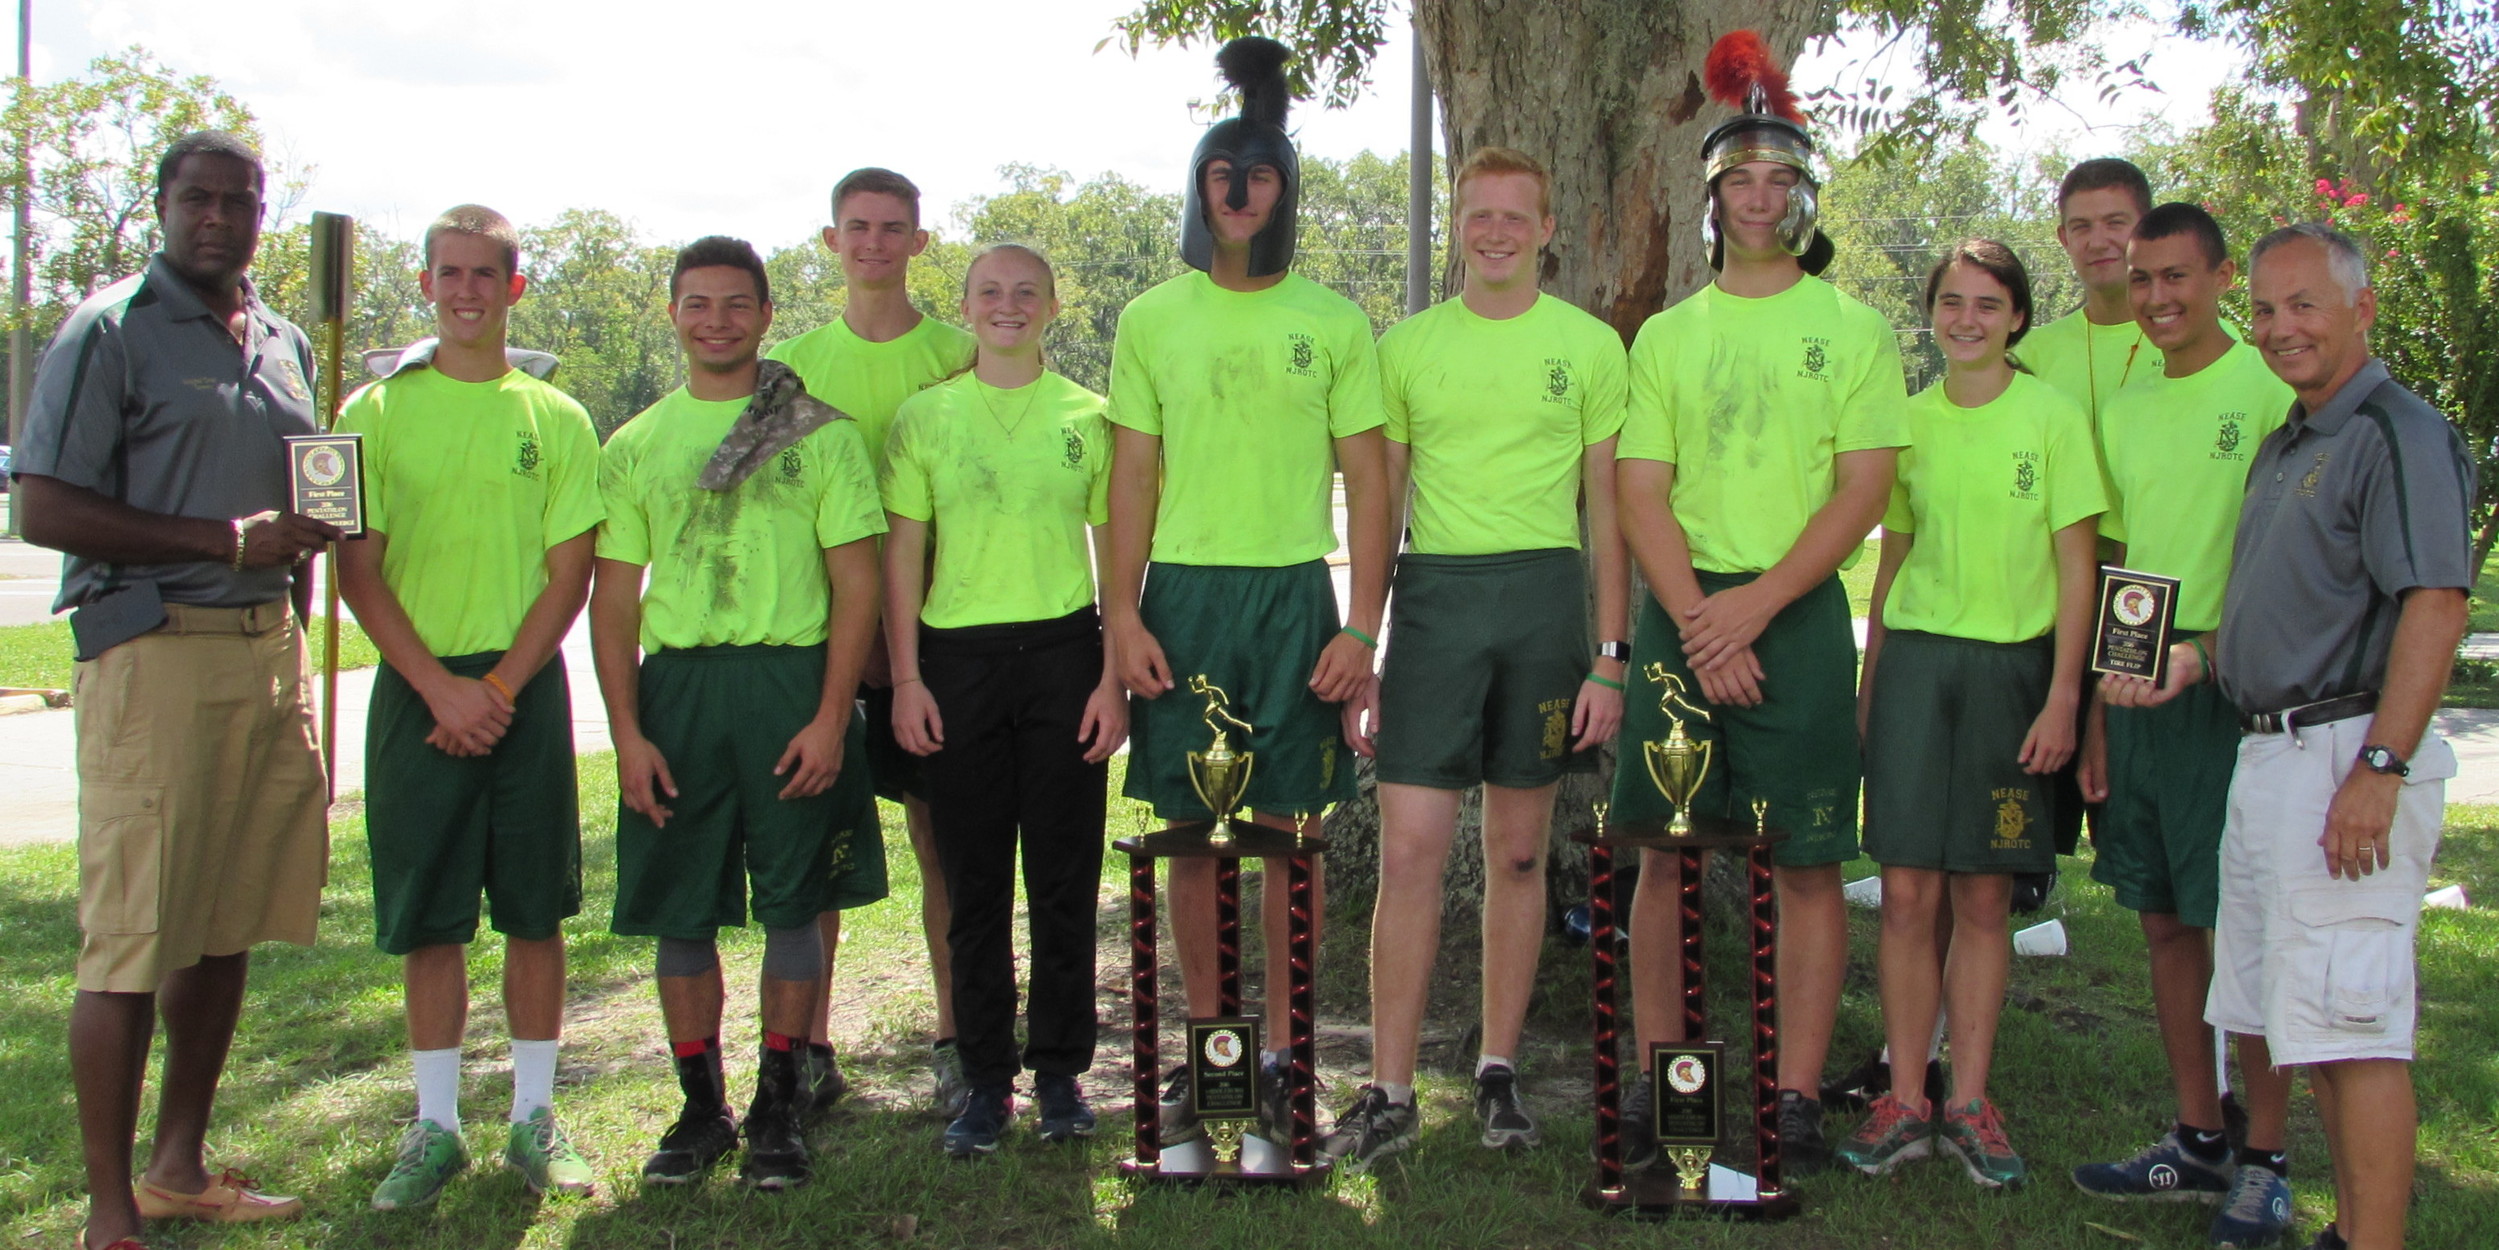 Nease NJROTC’s champion pentathlon teams won first and second place at the 2016 Middleburg Championship. Pictured left to right: Master Chief Petty Officer Duane A. Spears, Cadets Carter Cimaglia, Giovani Fletcher, Jesse Gatewood, Cali Vaughn, Justin Blackford, Brian Swicegood, Mackenzie Davis, Erin Sass, Matthew Moorefield, team alternate Chris Gilmer, and Capt. Scott LaRochelle.